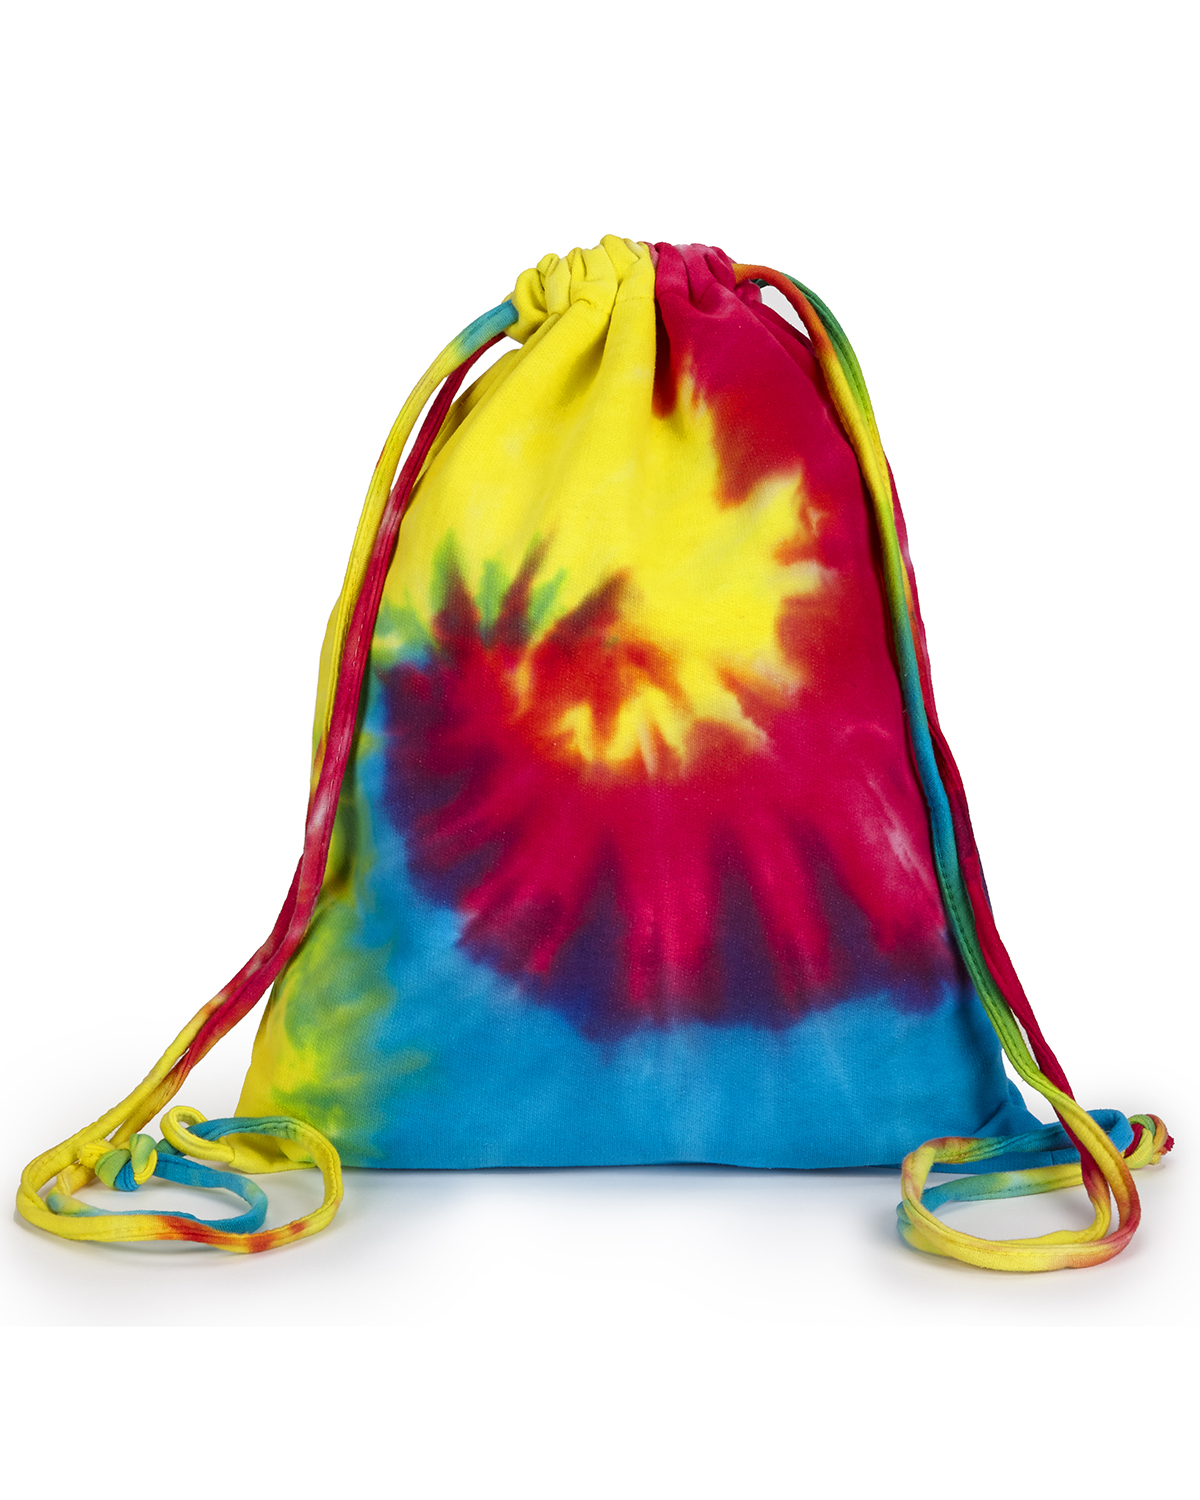 Tie-Dyed CD9500 - Swirl Tie-Dyed Sport Pack